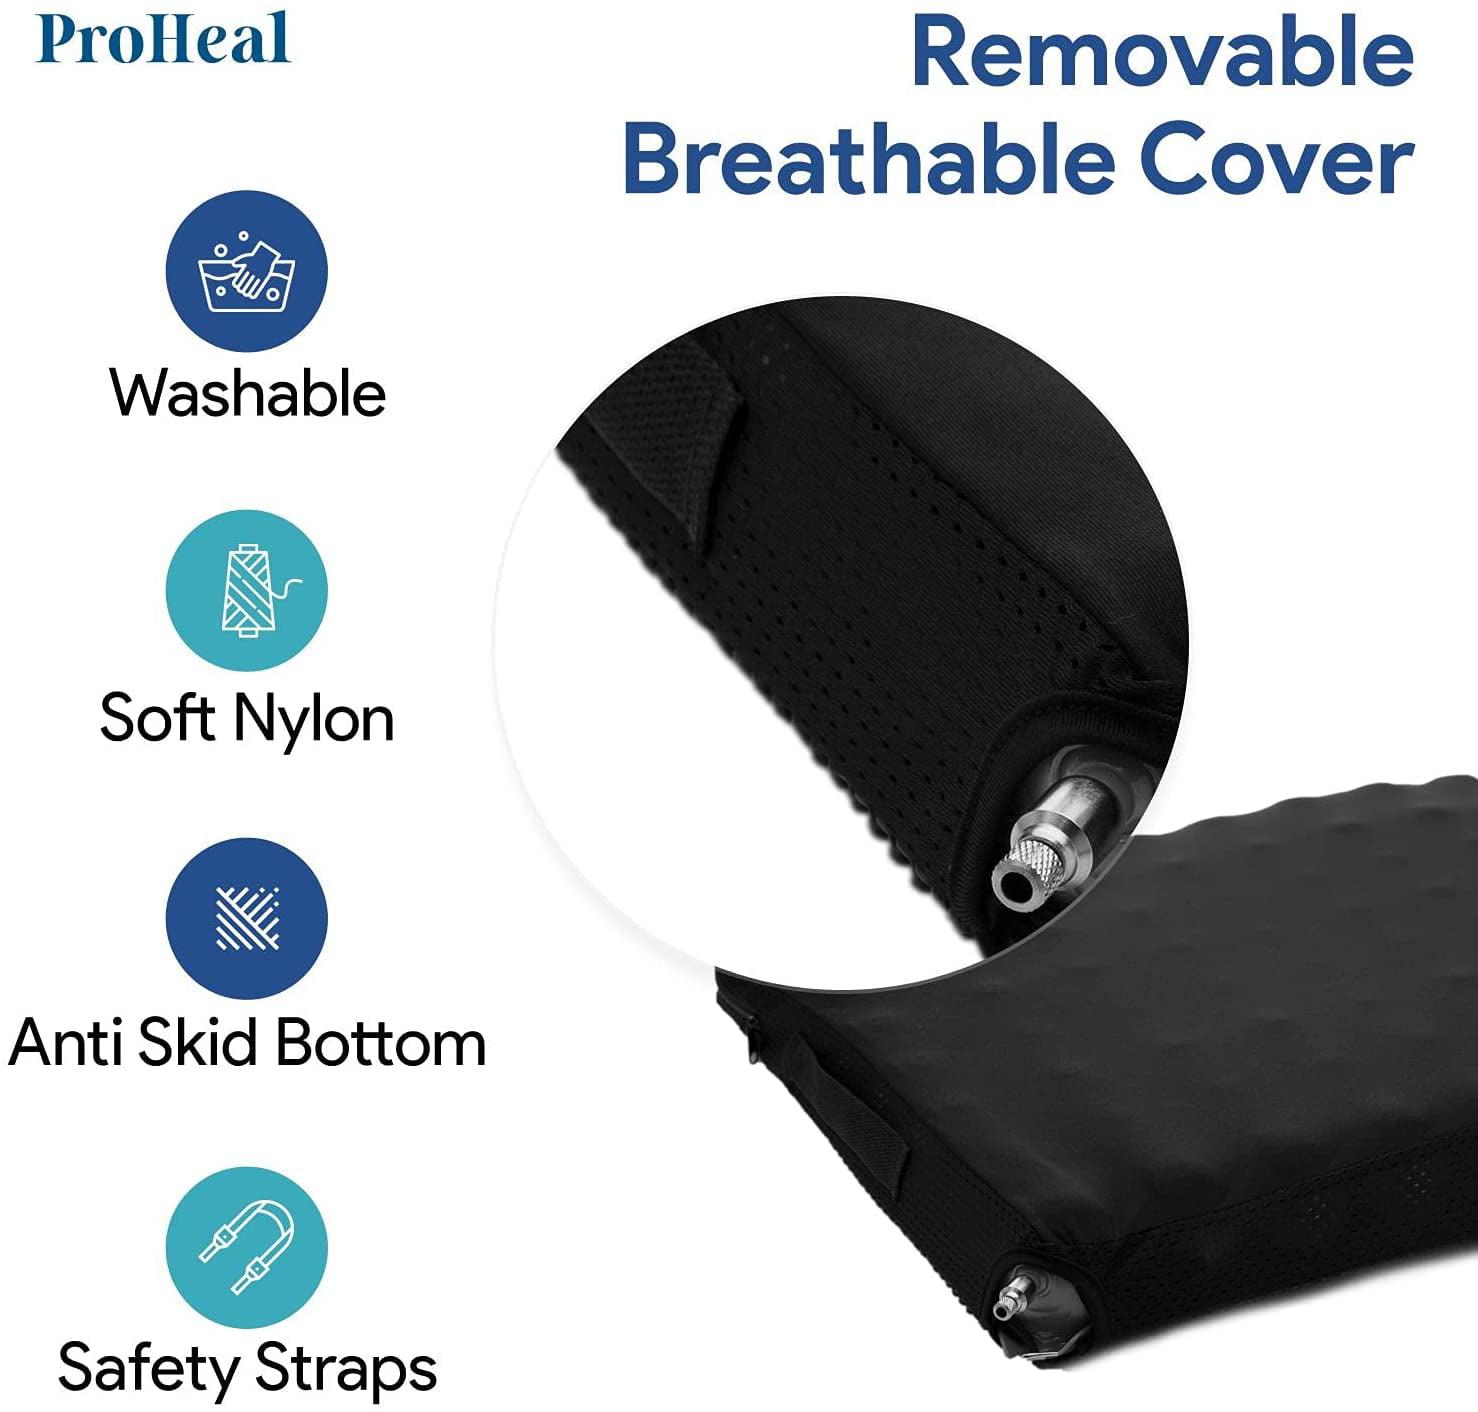 Foam Wheelchair Cushion with Removable Cover (16 x 18 x 2 inches) For Sale